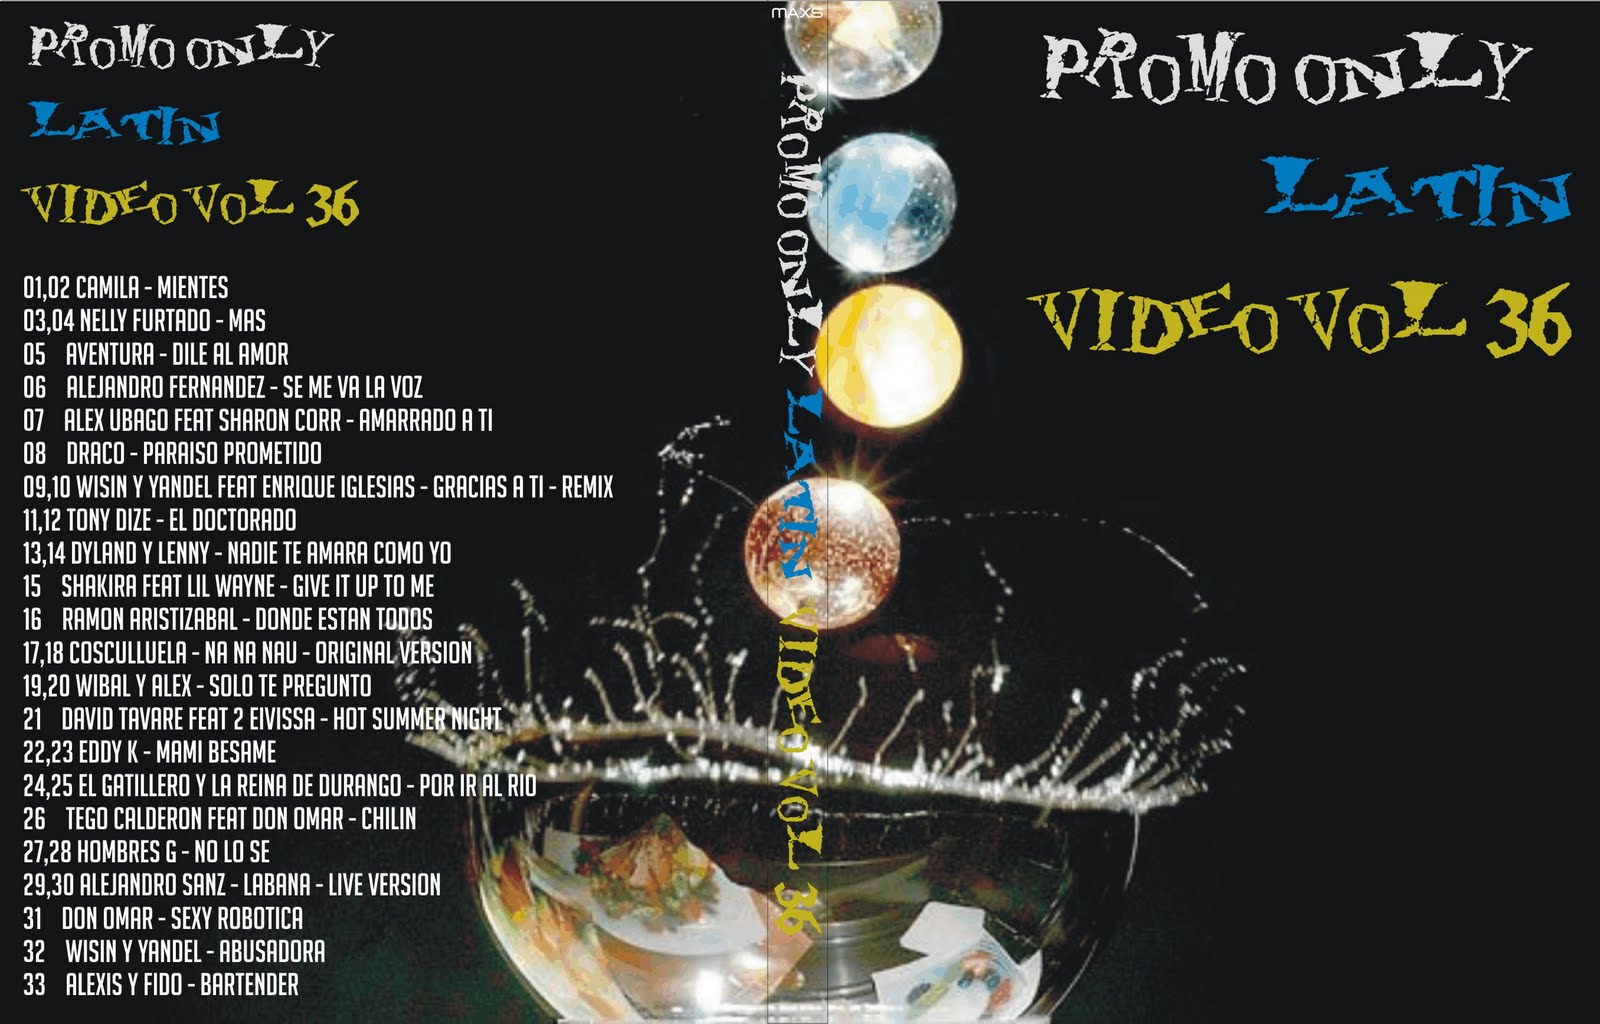 Promo Only Latin Video 30